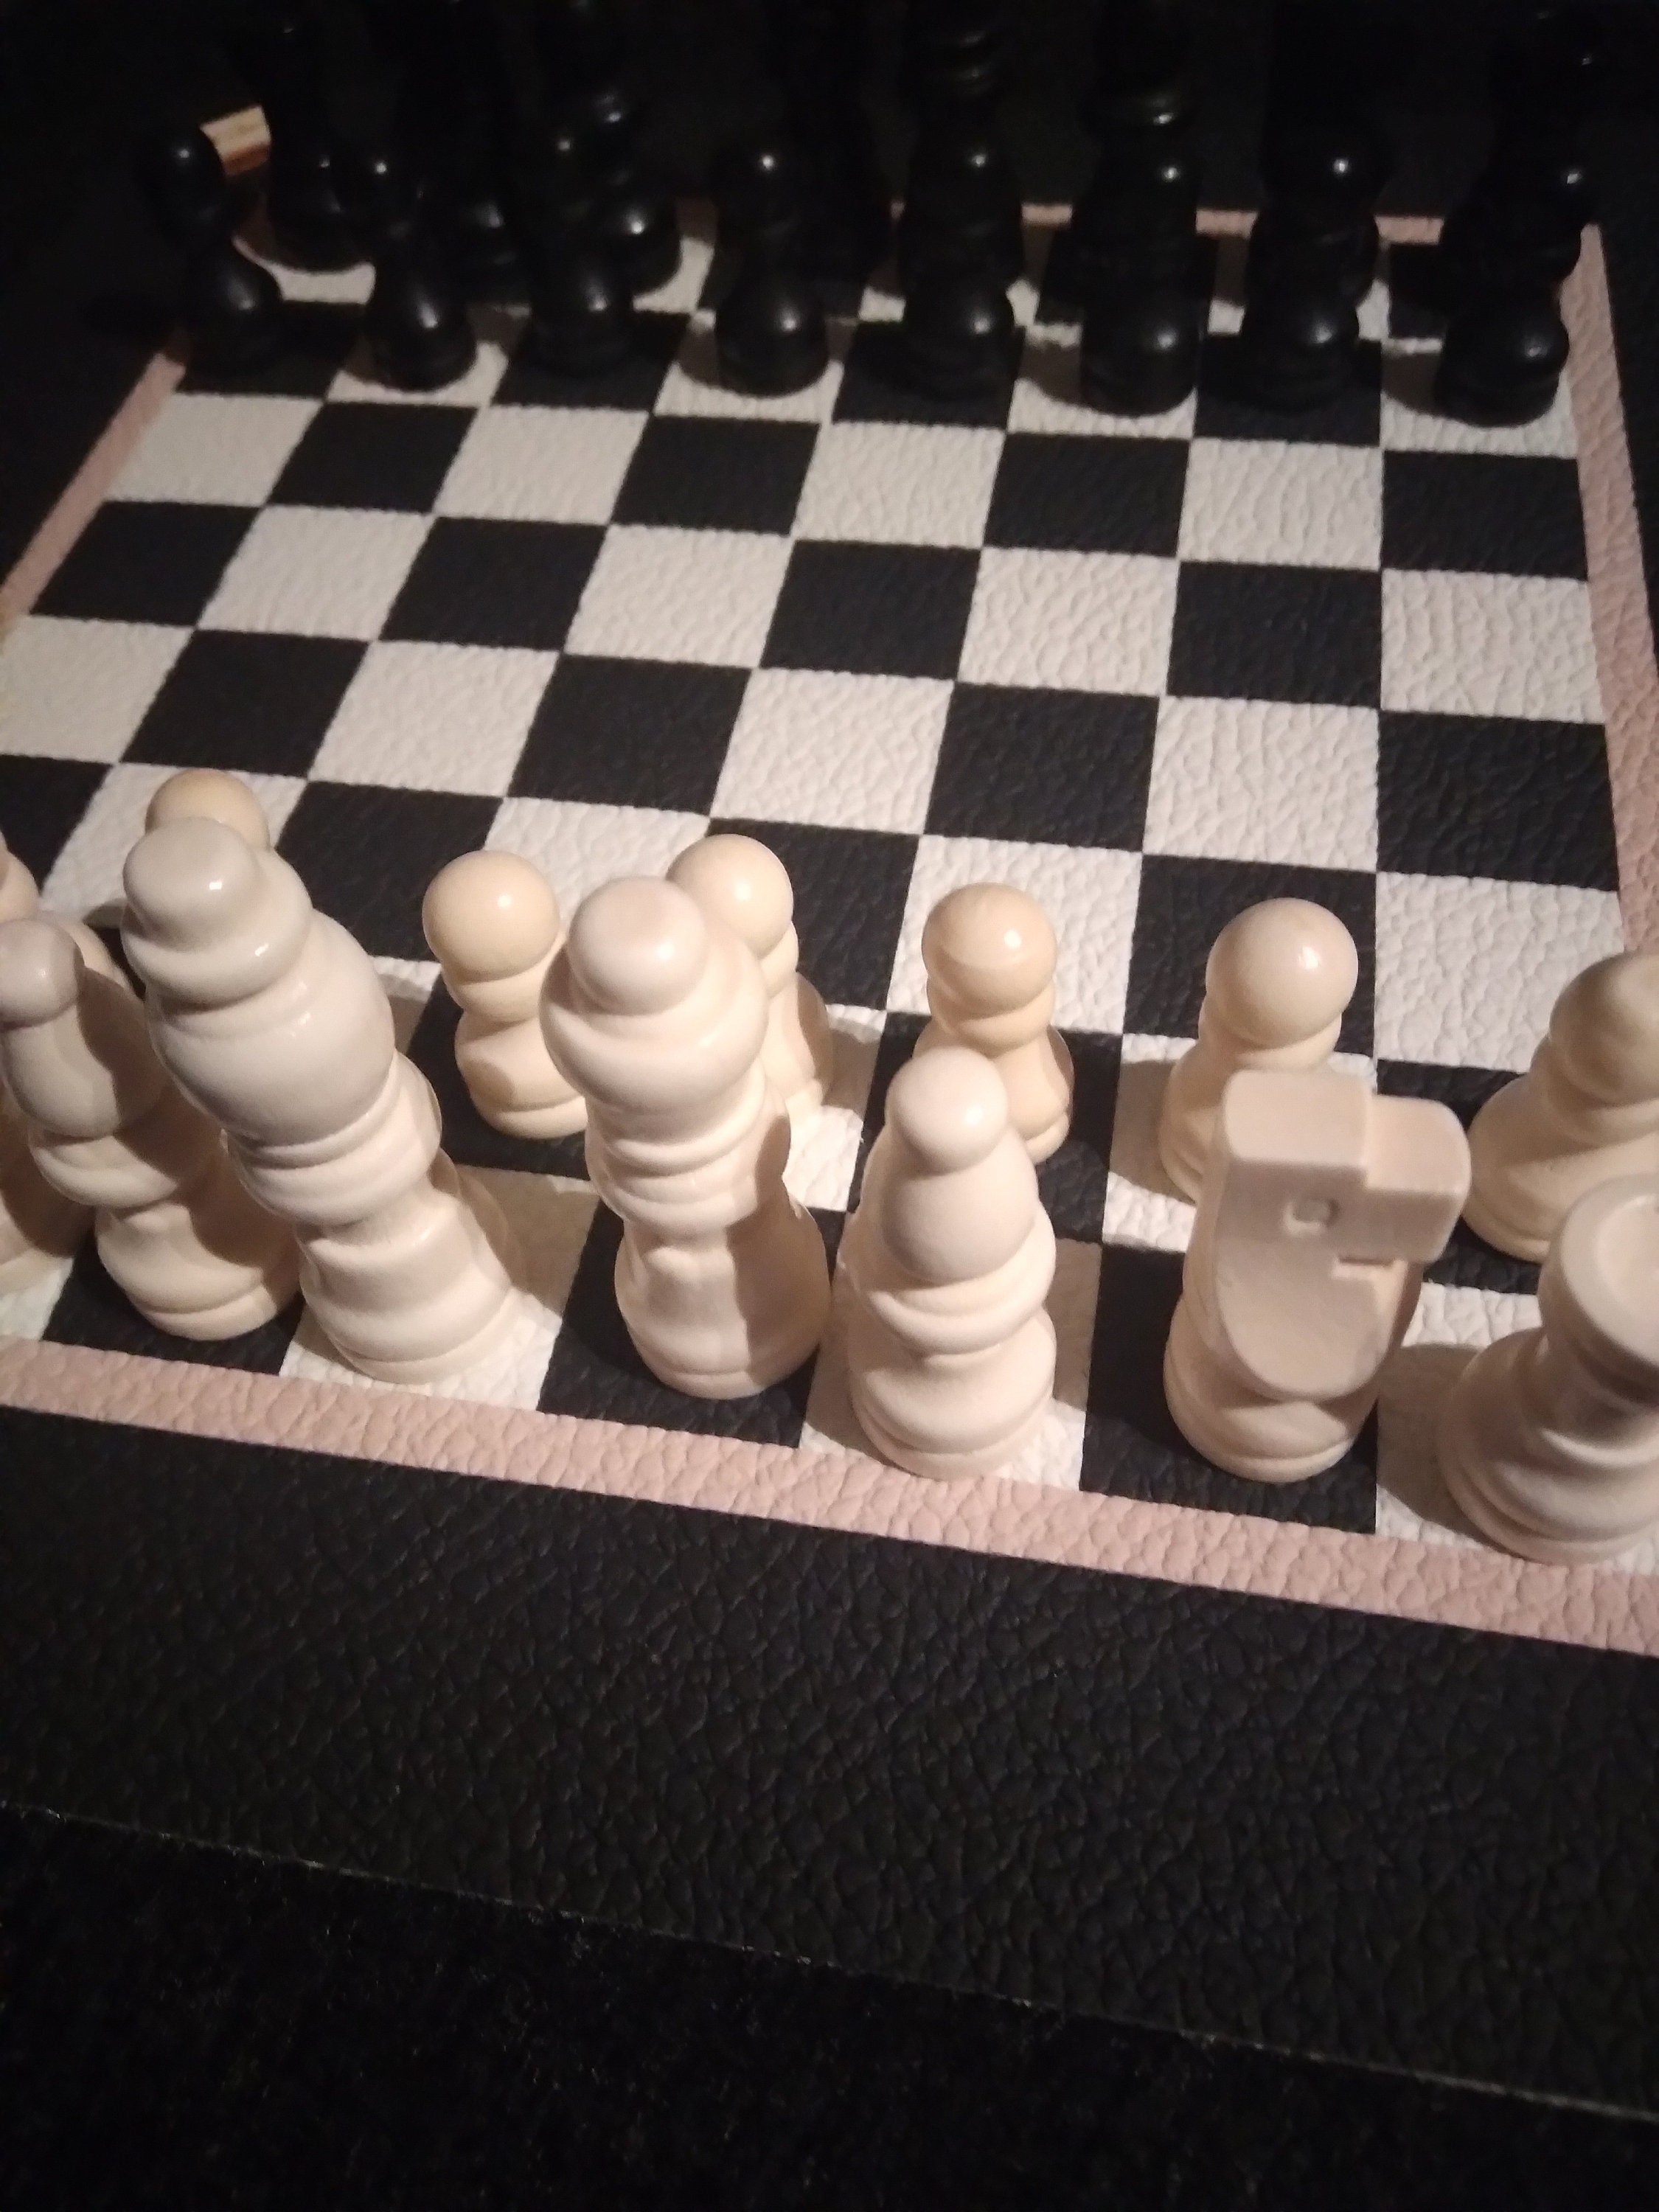 Skai Chess Board Made by Me 